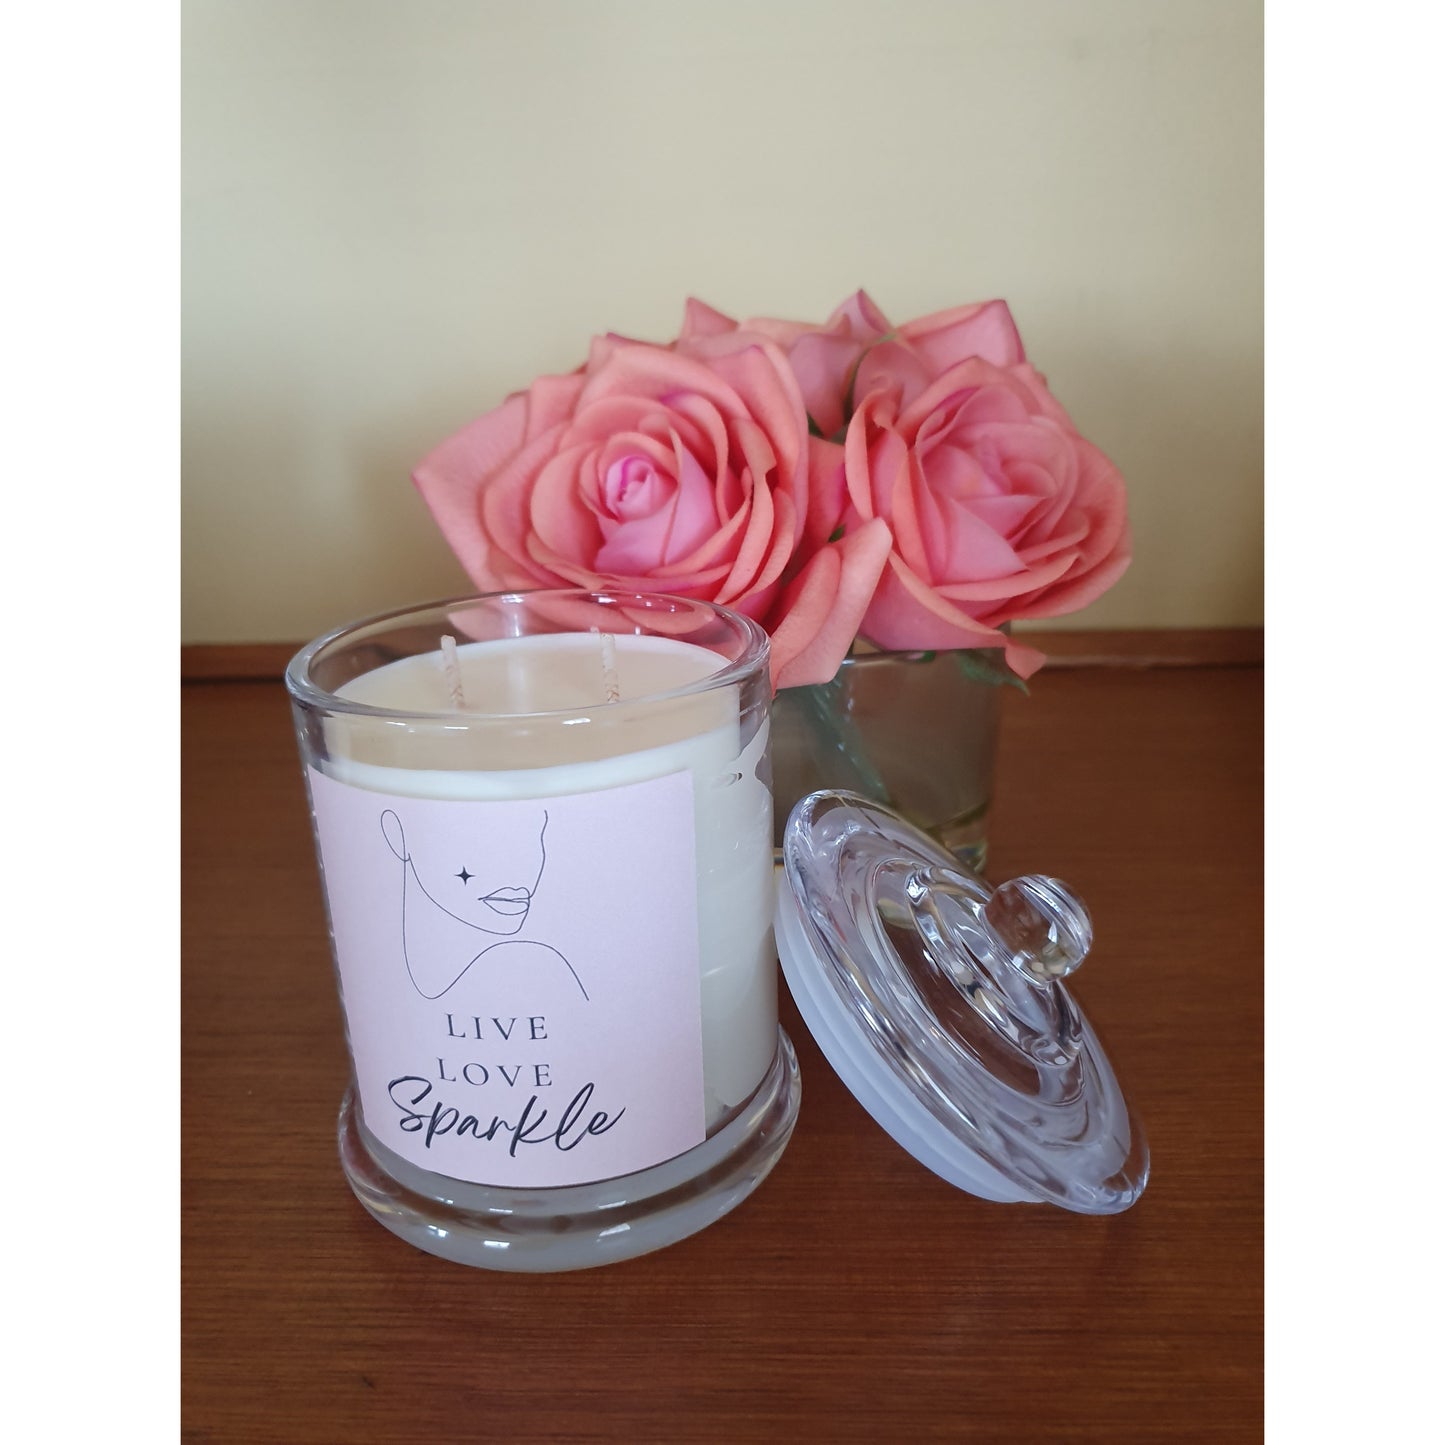 Inspirational Quote Candles - Live Love Sparkle